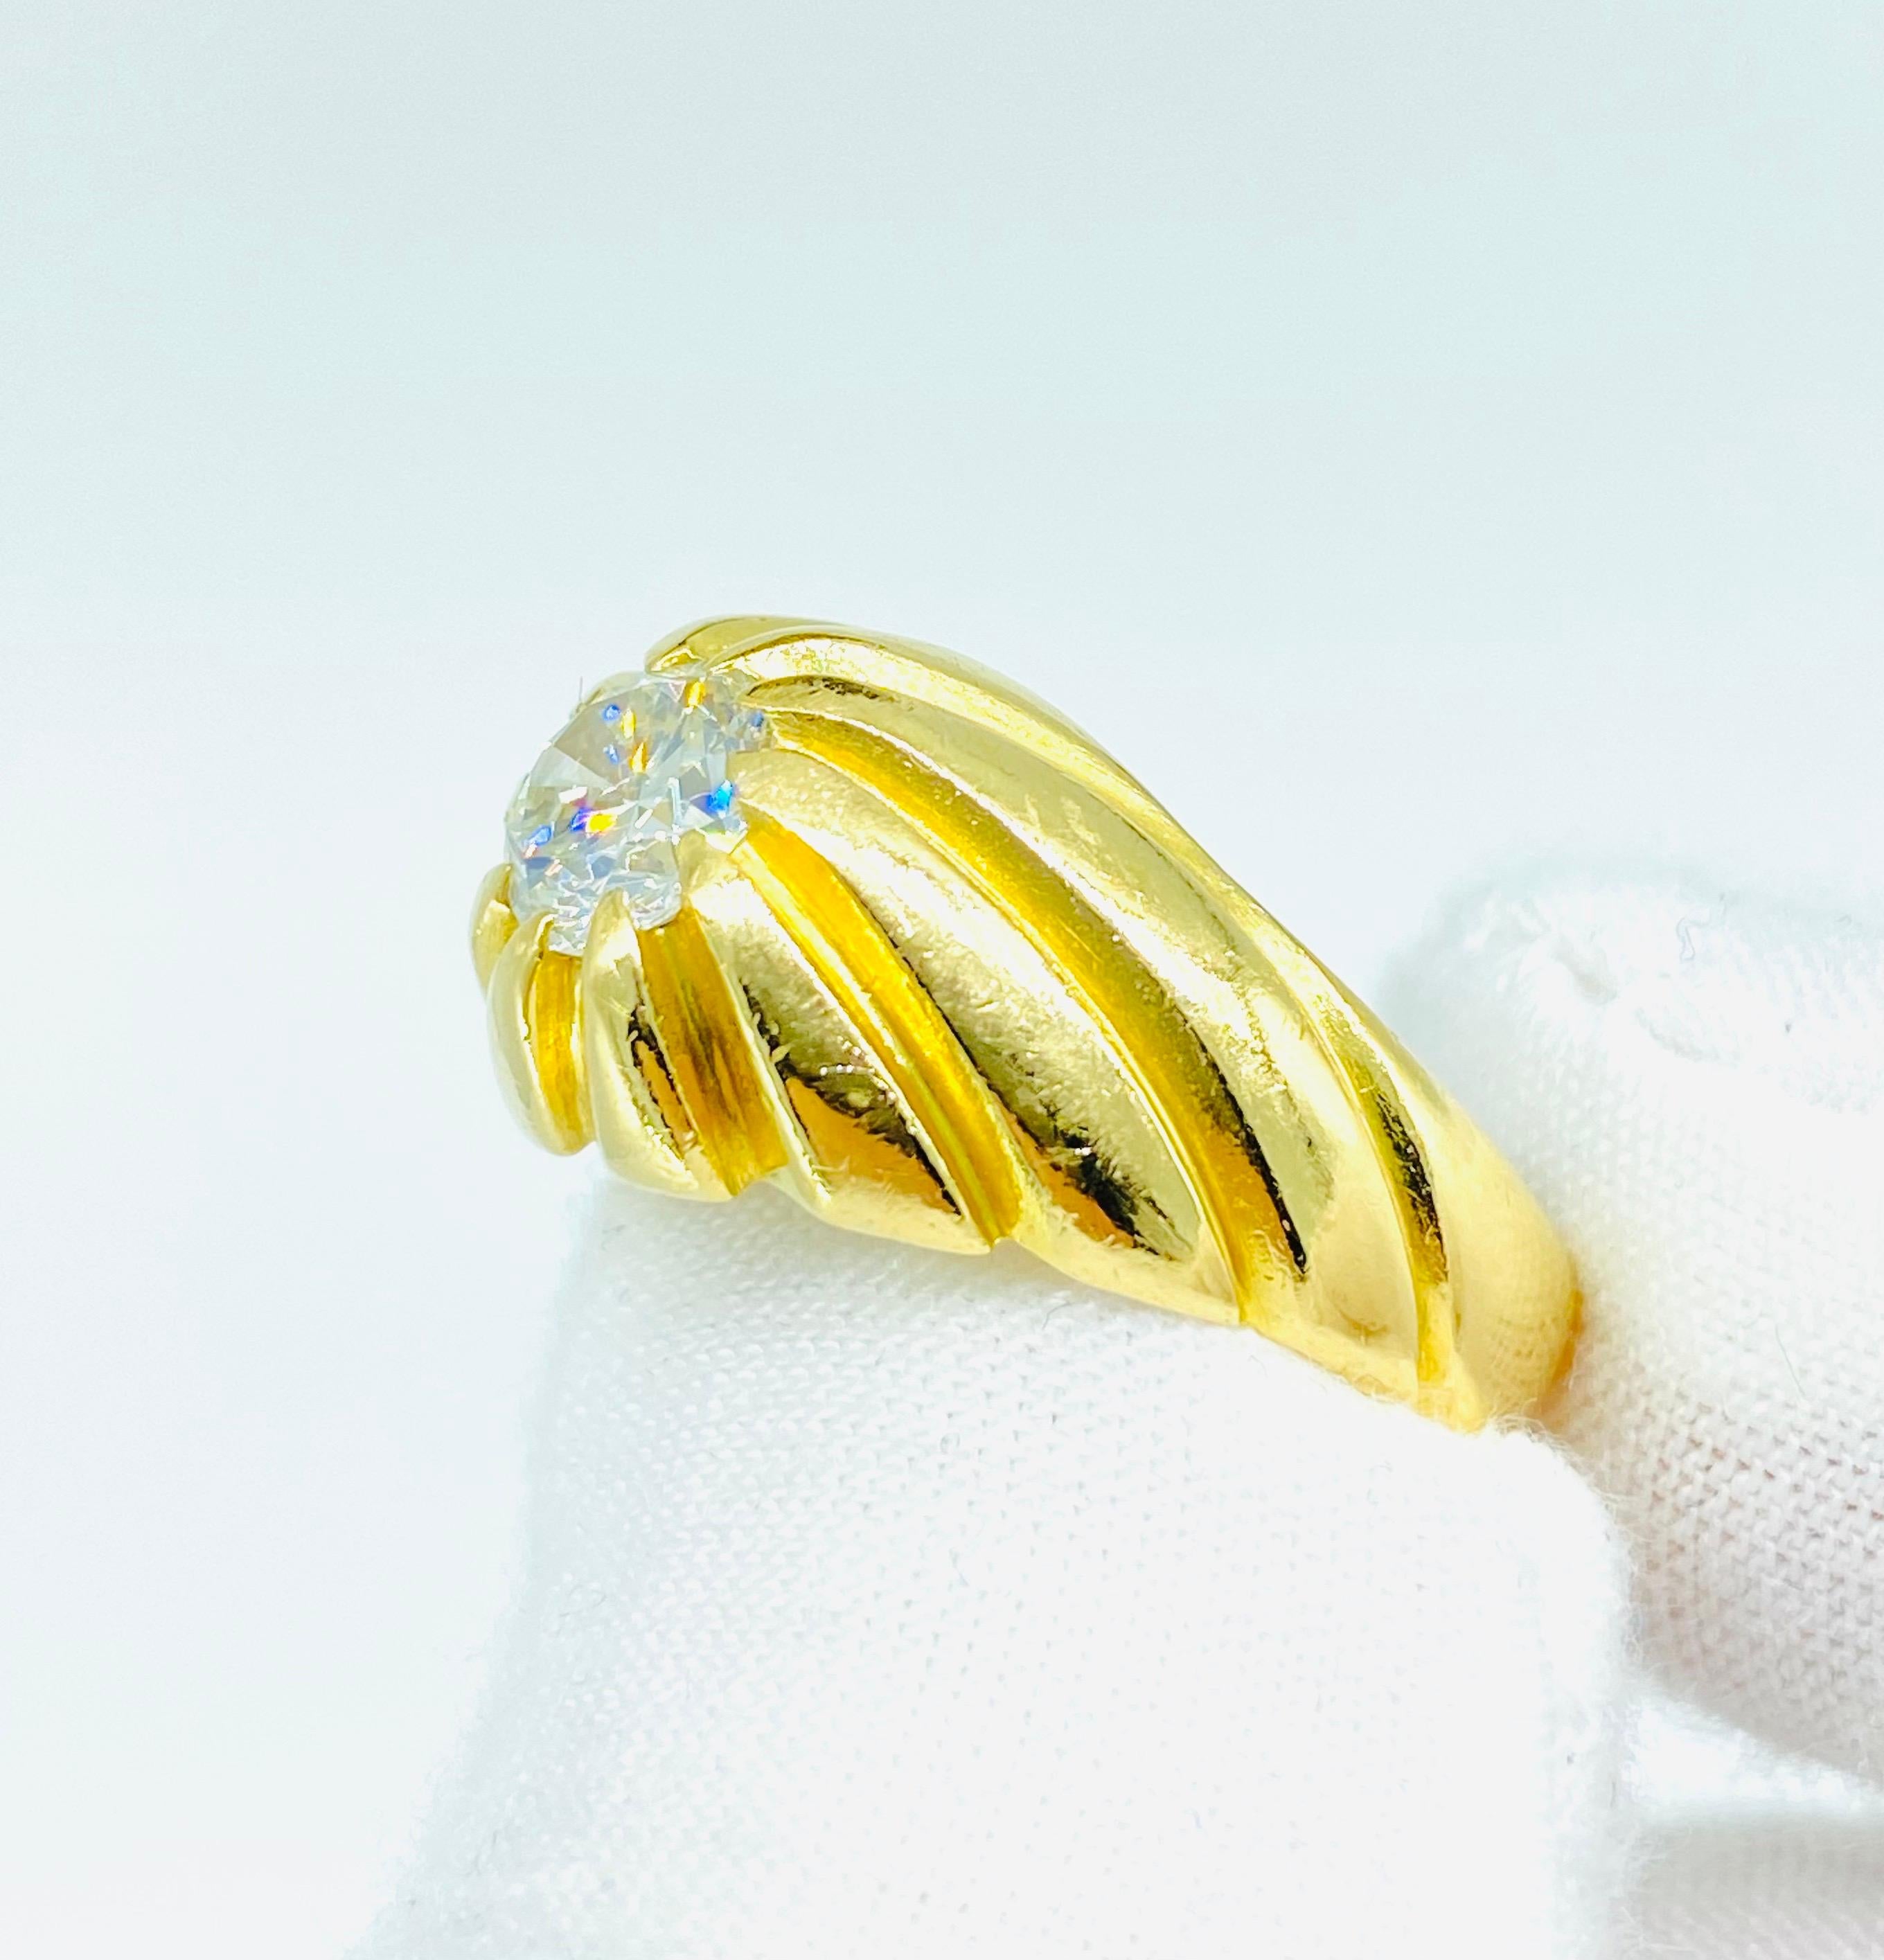 Vintage 1.00 Carat Center Diamond Men’s Swirl Pinky Ring 18k Gold. Very impressive ring design swirls making it look like an illusion twisting around while the beautiful diamond in the center is sparkling and shining all over. The diamond is weights